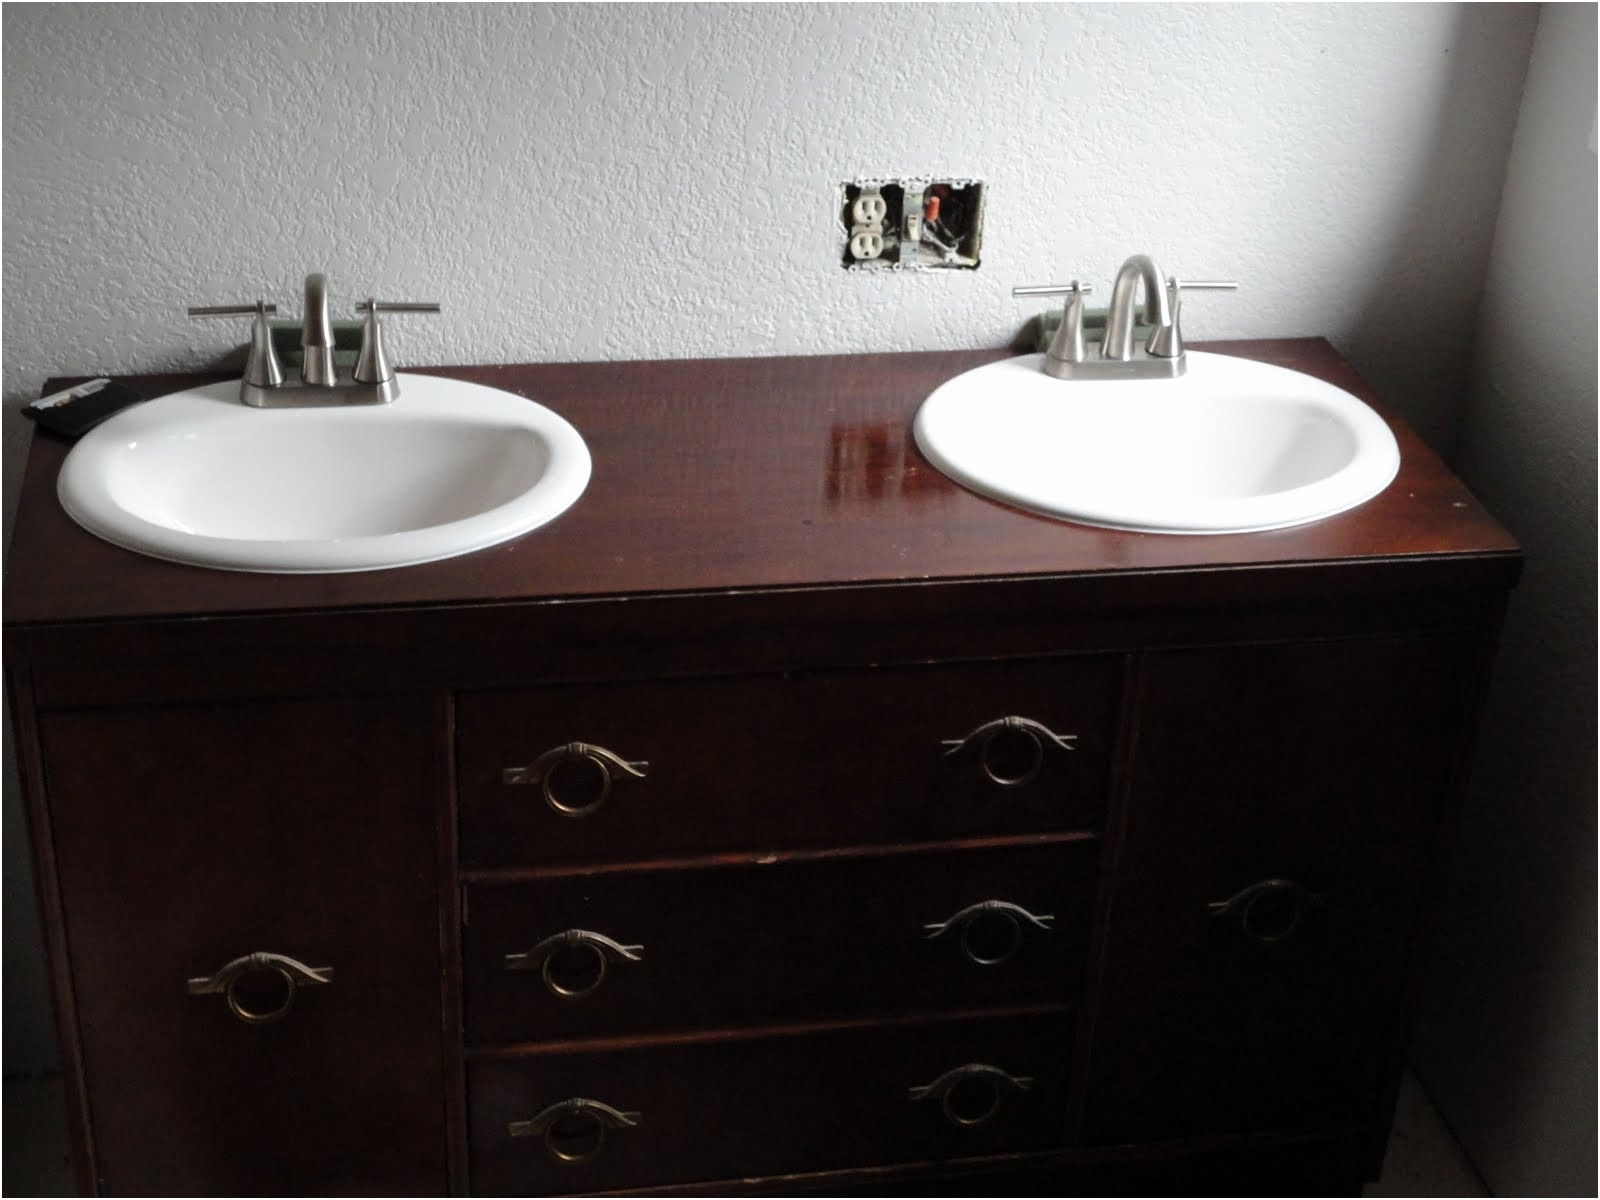 Lowes Bathroom Sinks And Faucets
 Bathroom Captivating Lowes Bathroom Vanities And Sinks